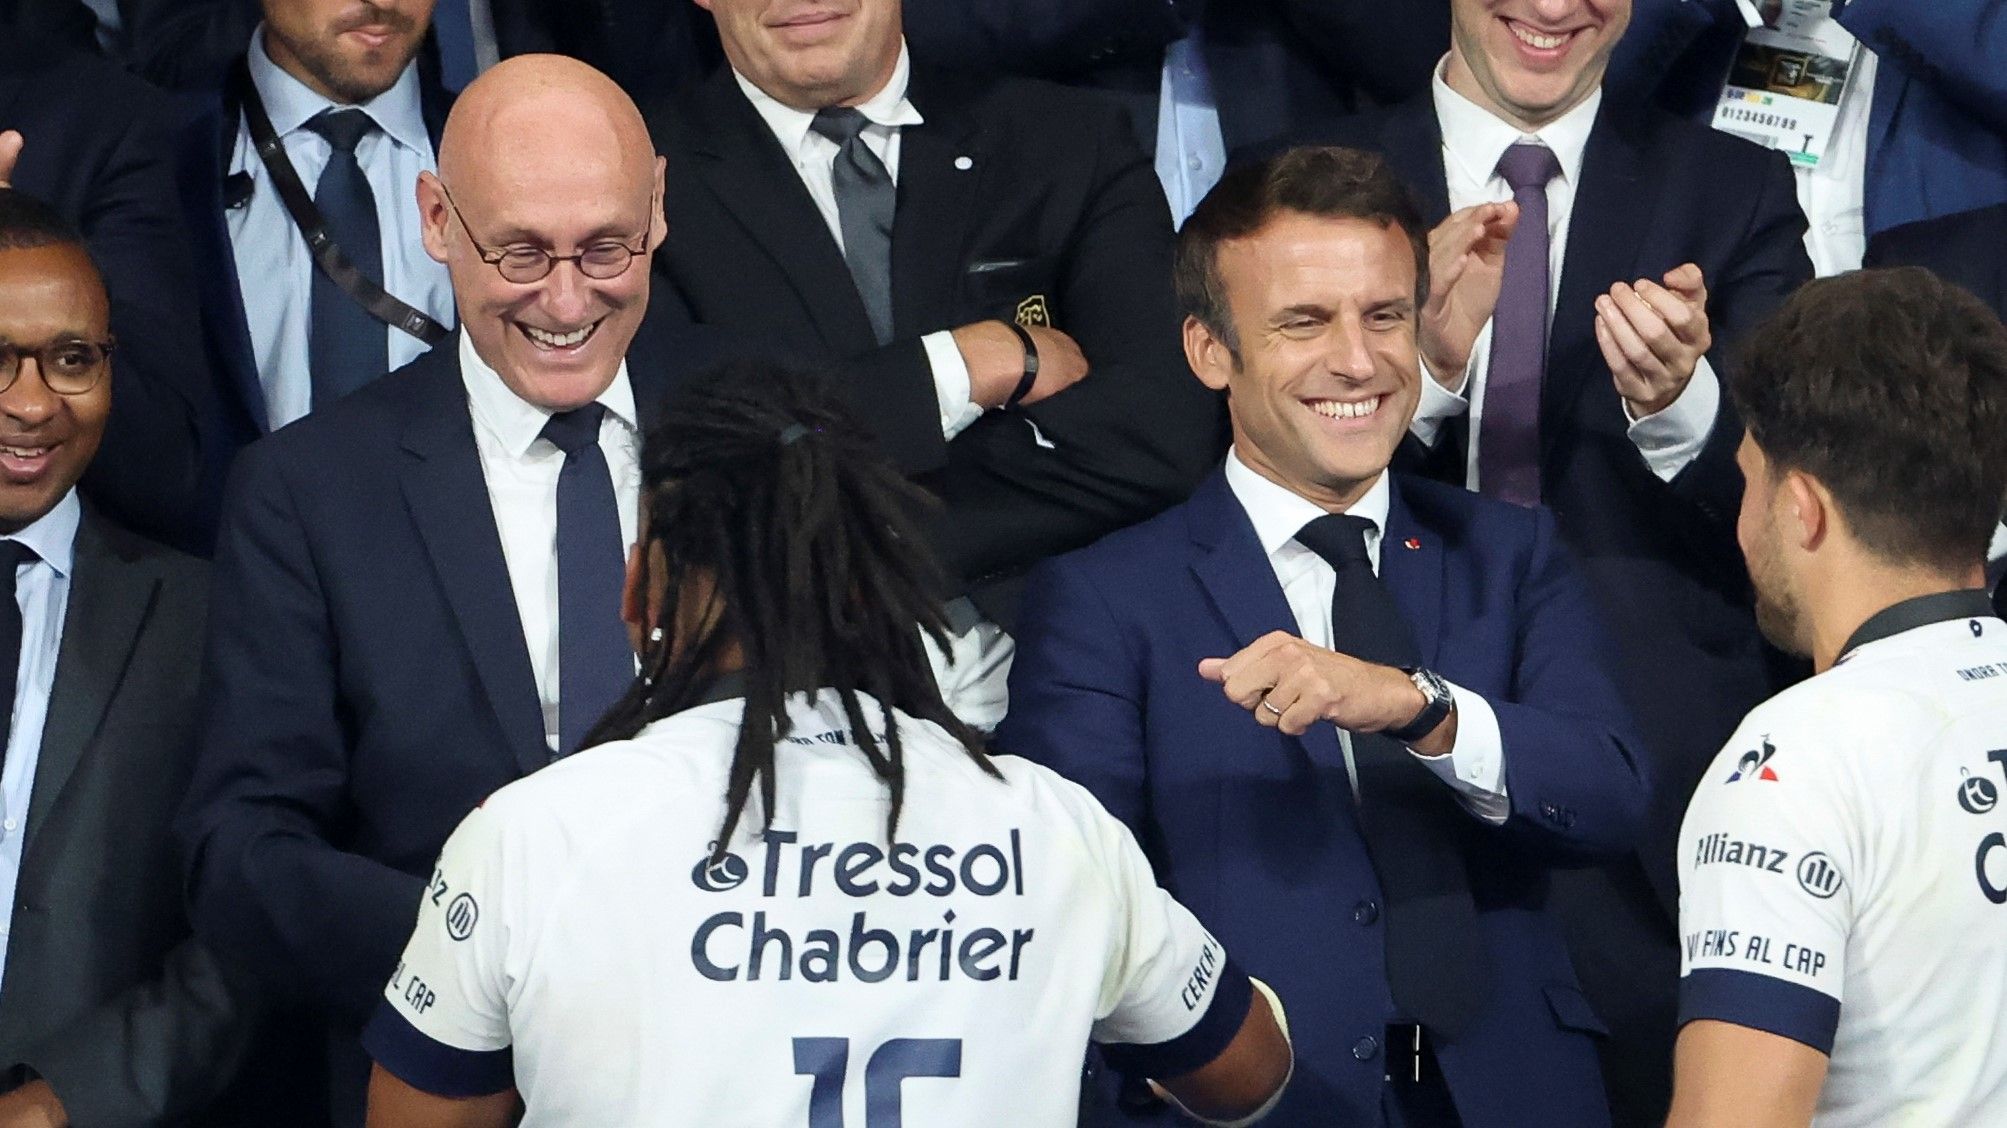 President of French Rugby Federation FFR Bernard Laporte (left) with French President Emmanuel Macron during the trophy ceremony following the Top 14 Final rugby match at Stade de France.